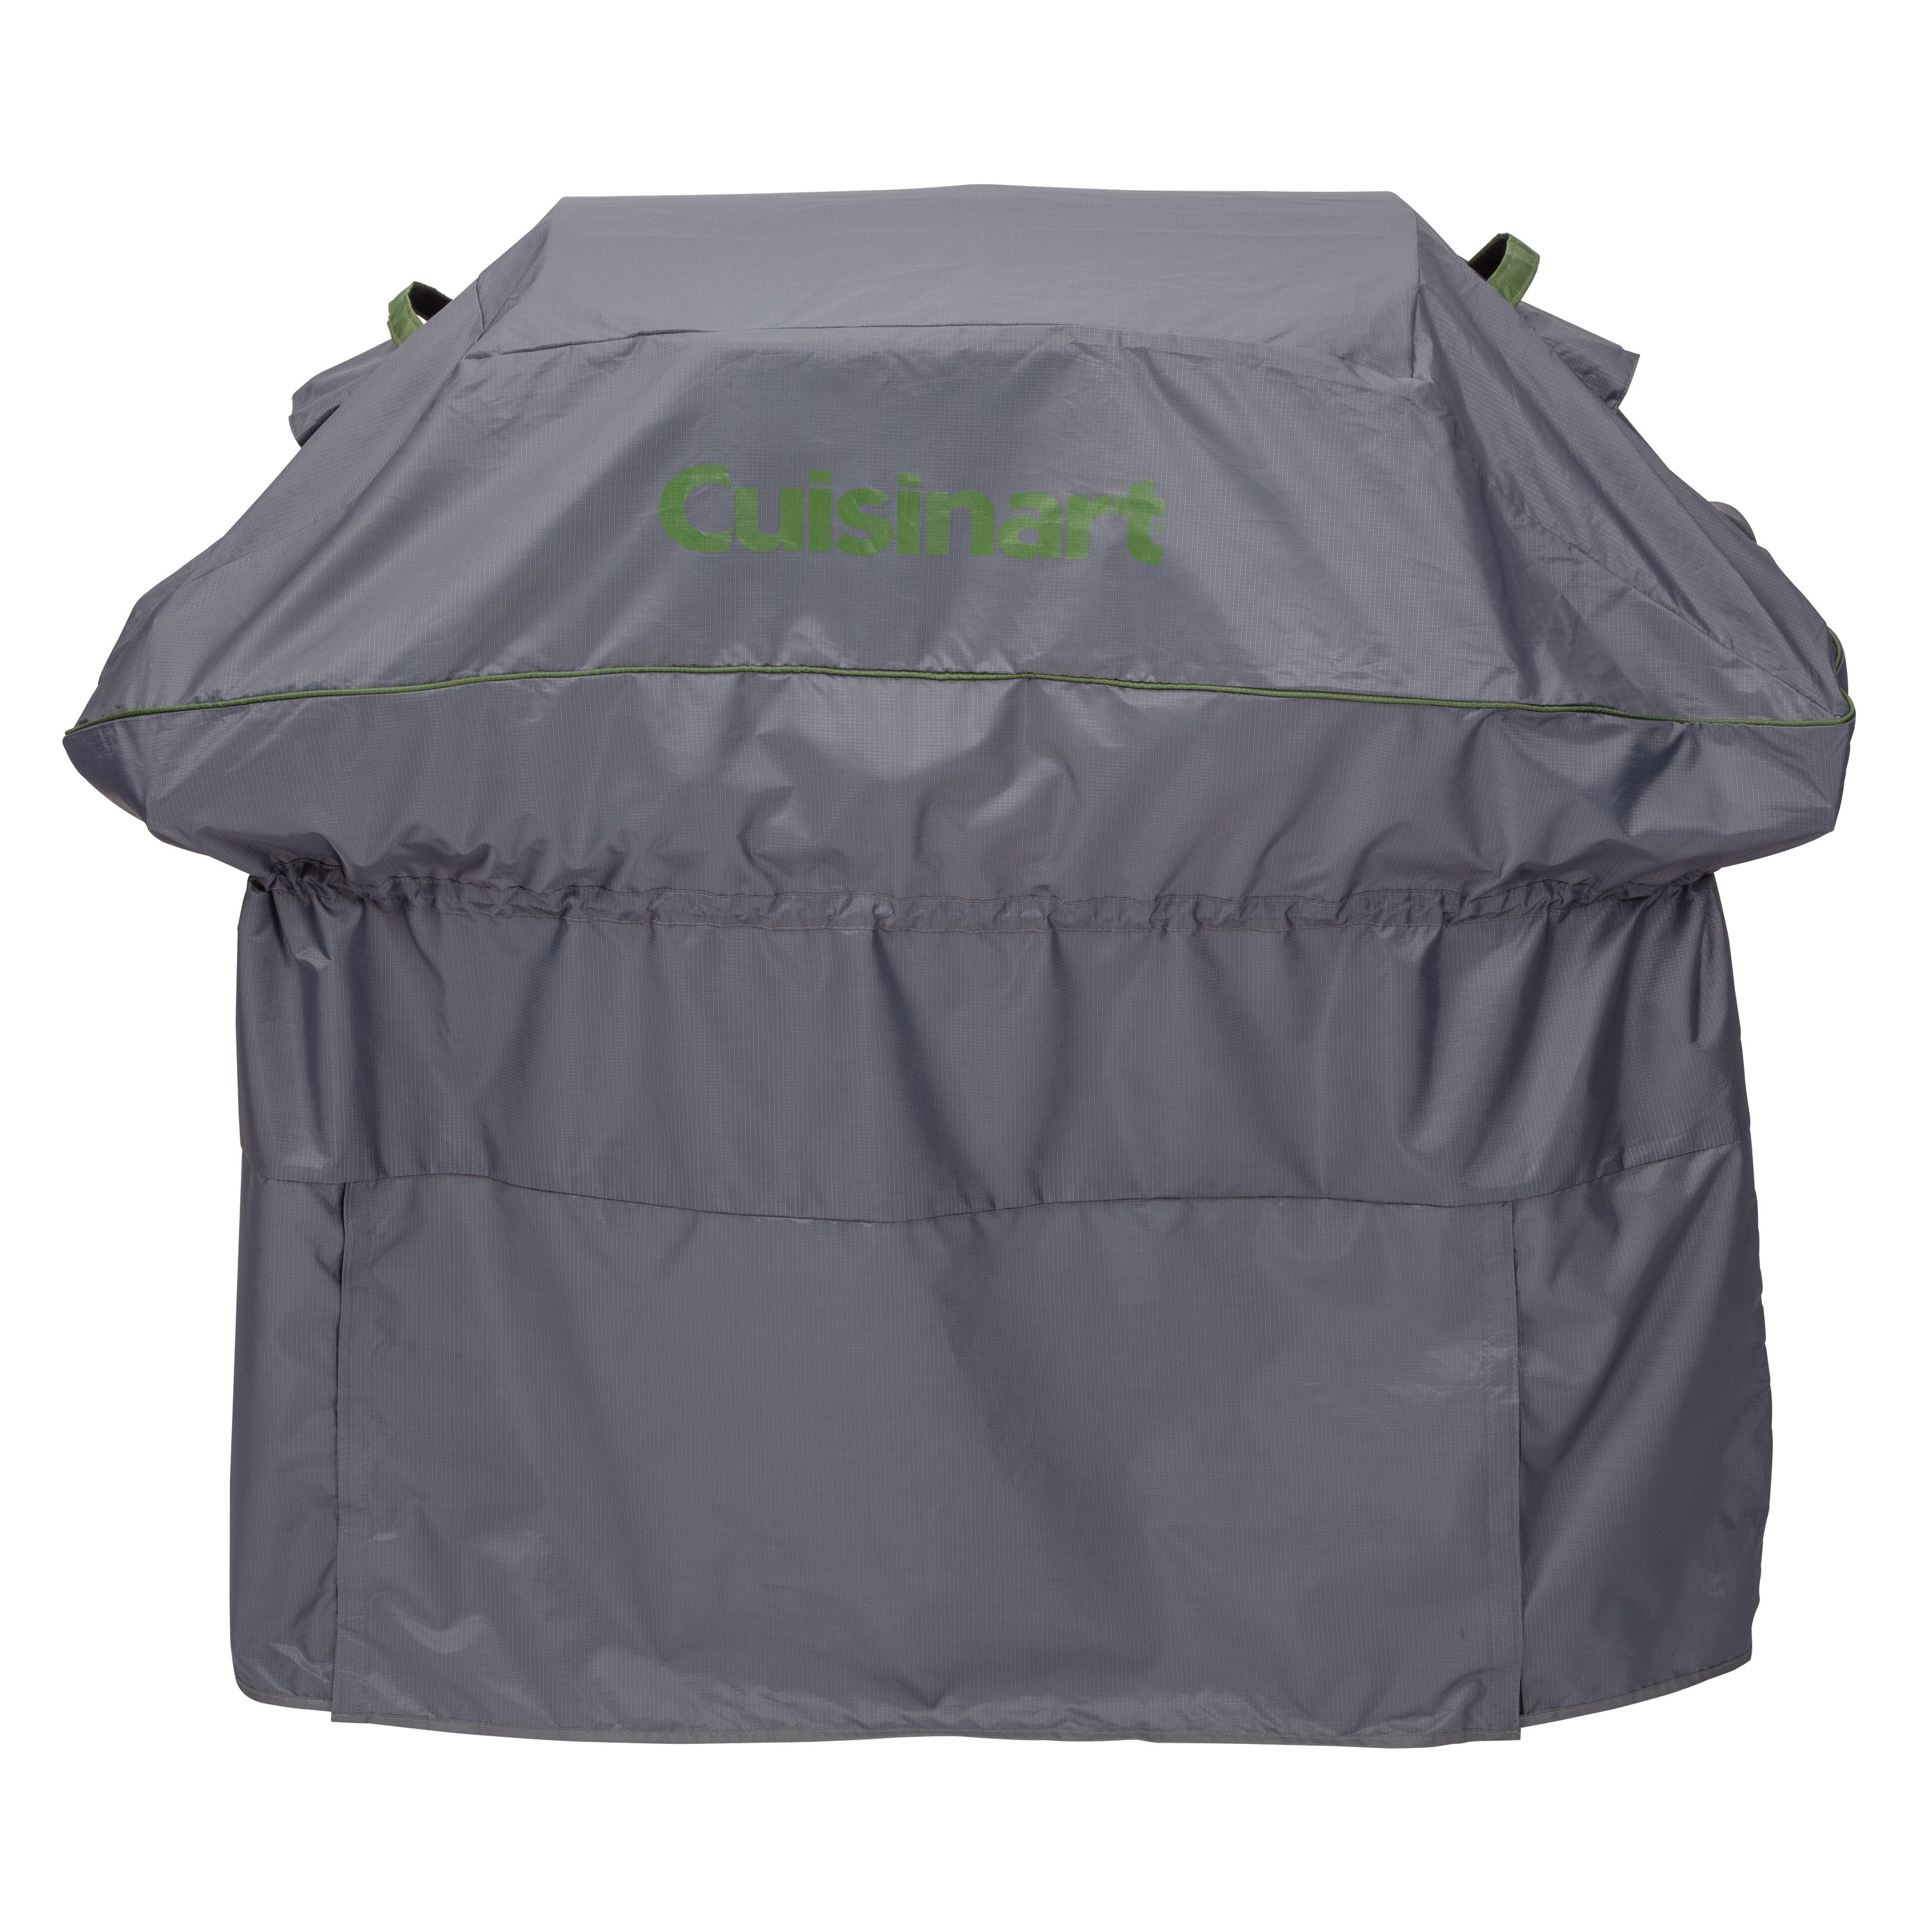 Premium Lightweight Ripstop Grill Cover